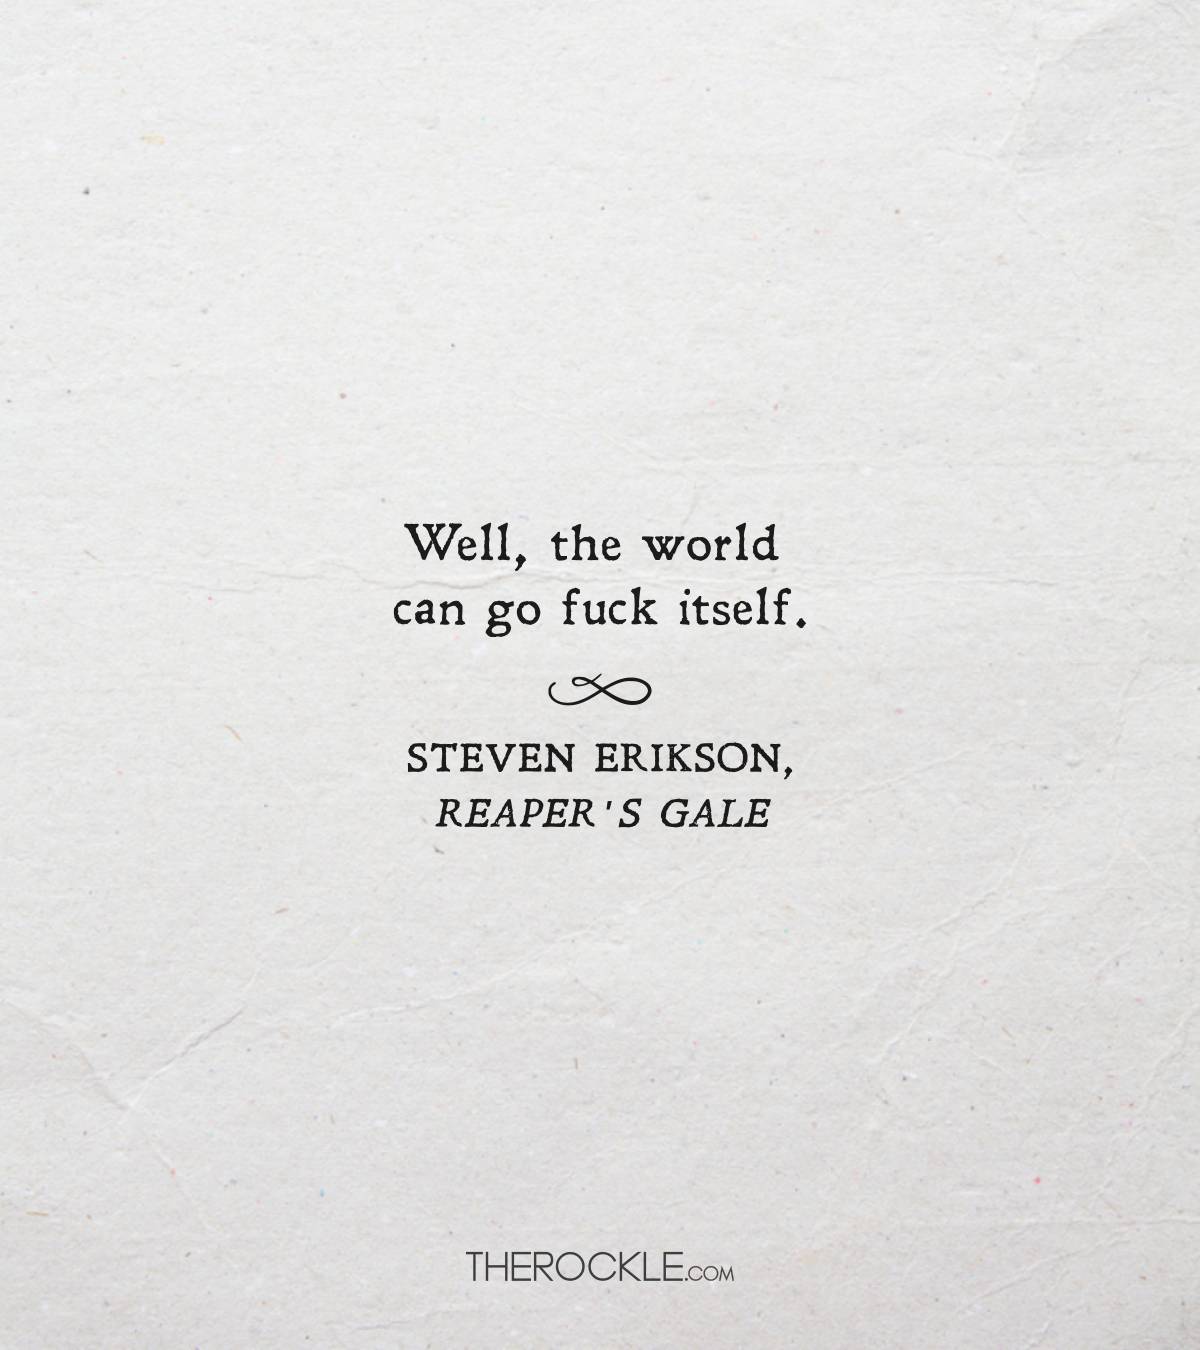 Quote from Steven Erikson's Reaper’s Gale book